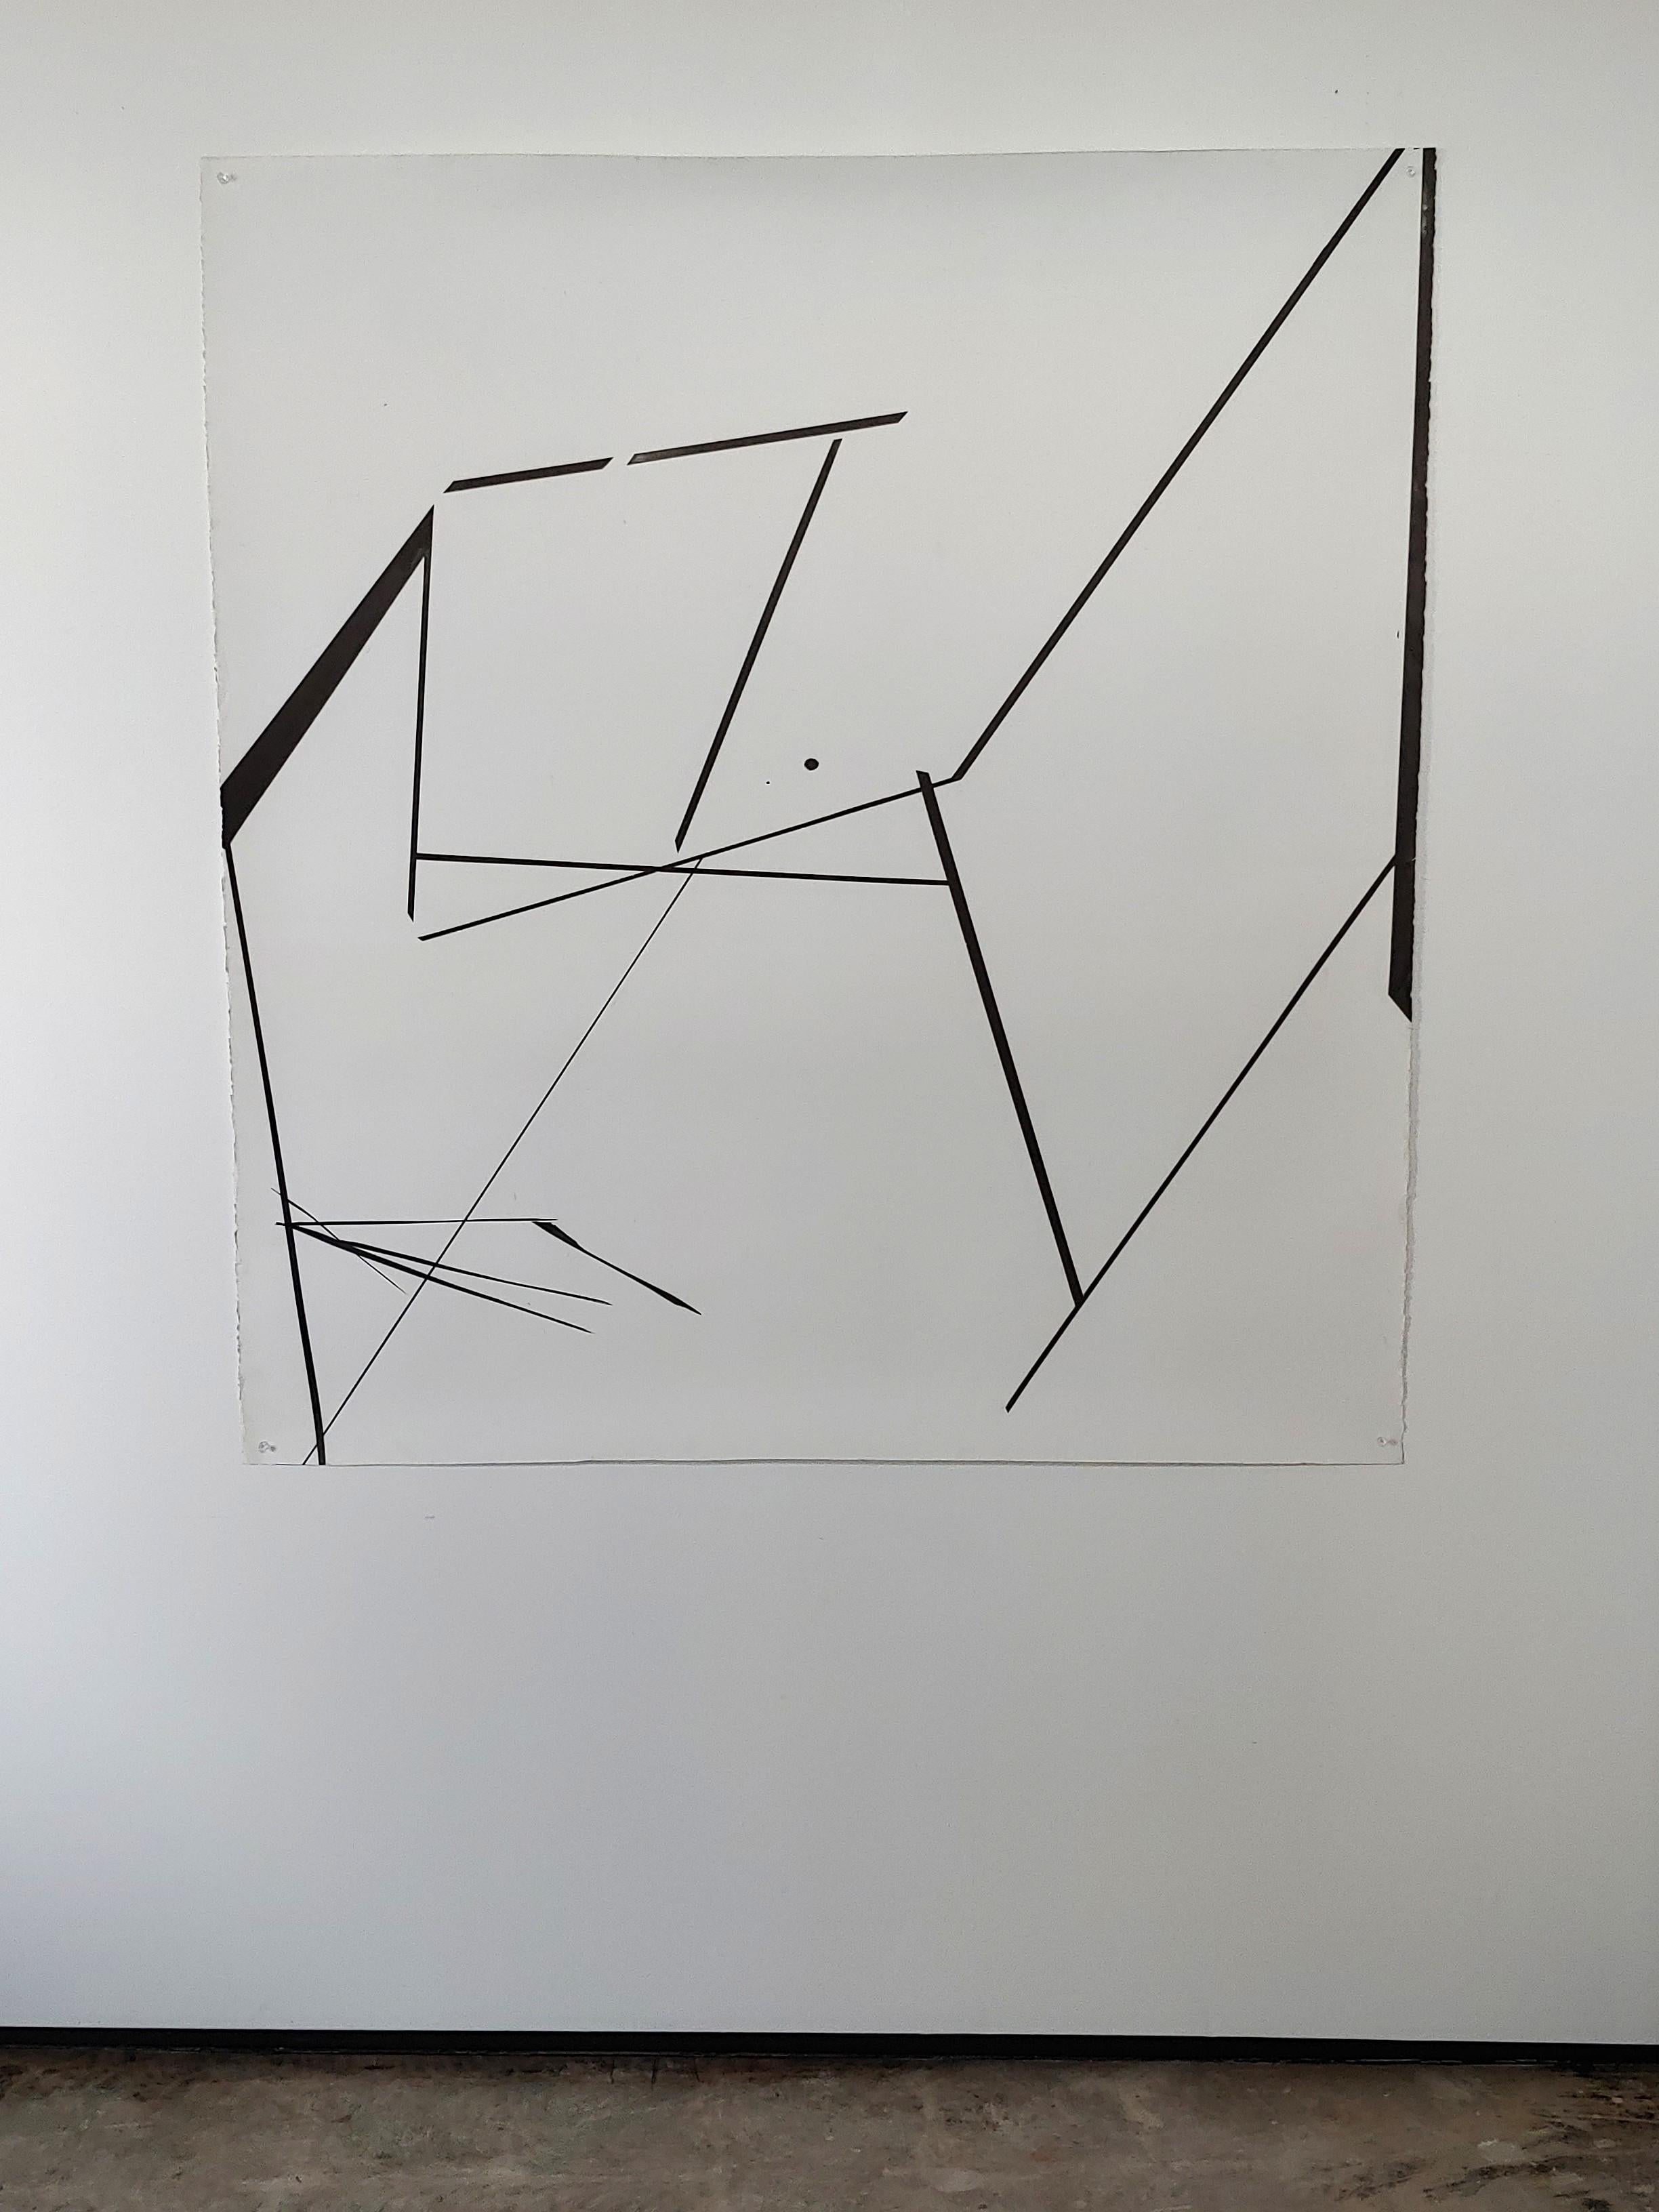 Geometric, abstract, monochromatic, black & white, linear, ink on paper drawing - Art by Ronald Rupert Santos